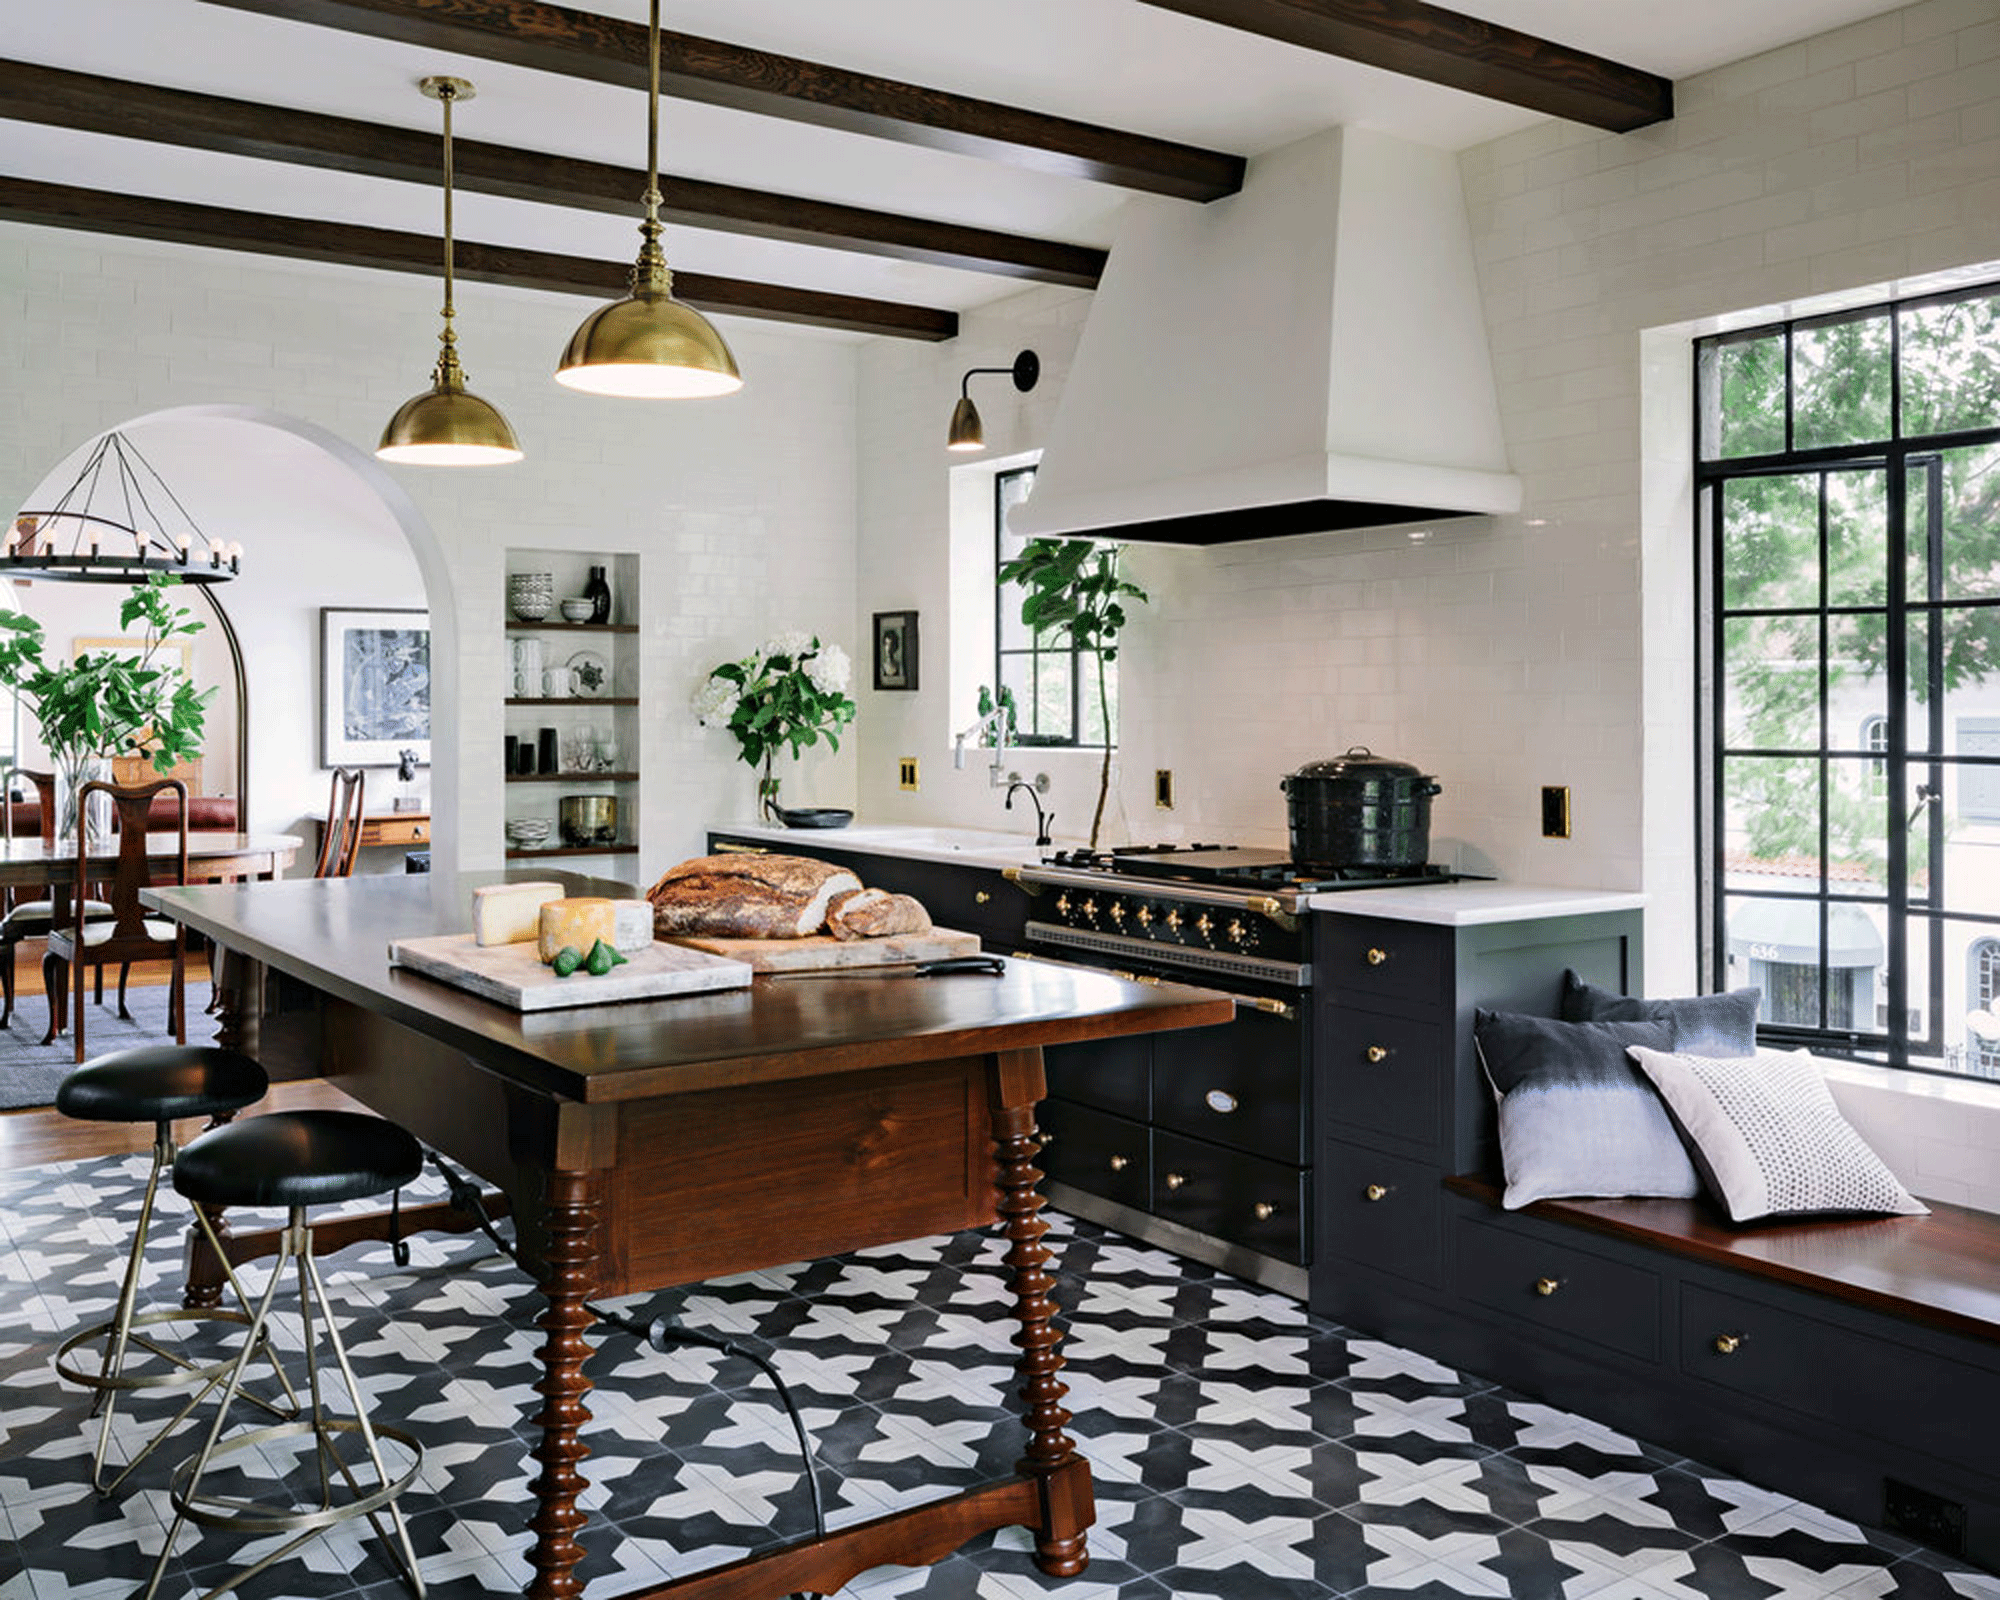 Kitchen with freestanding island and patterned floor